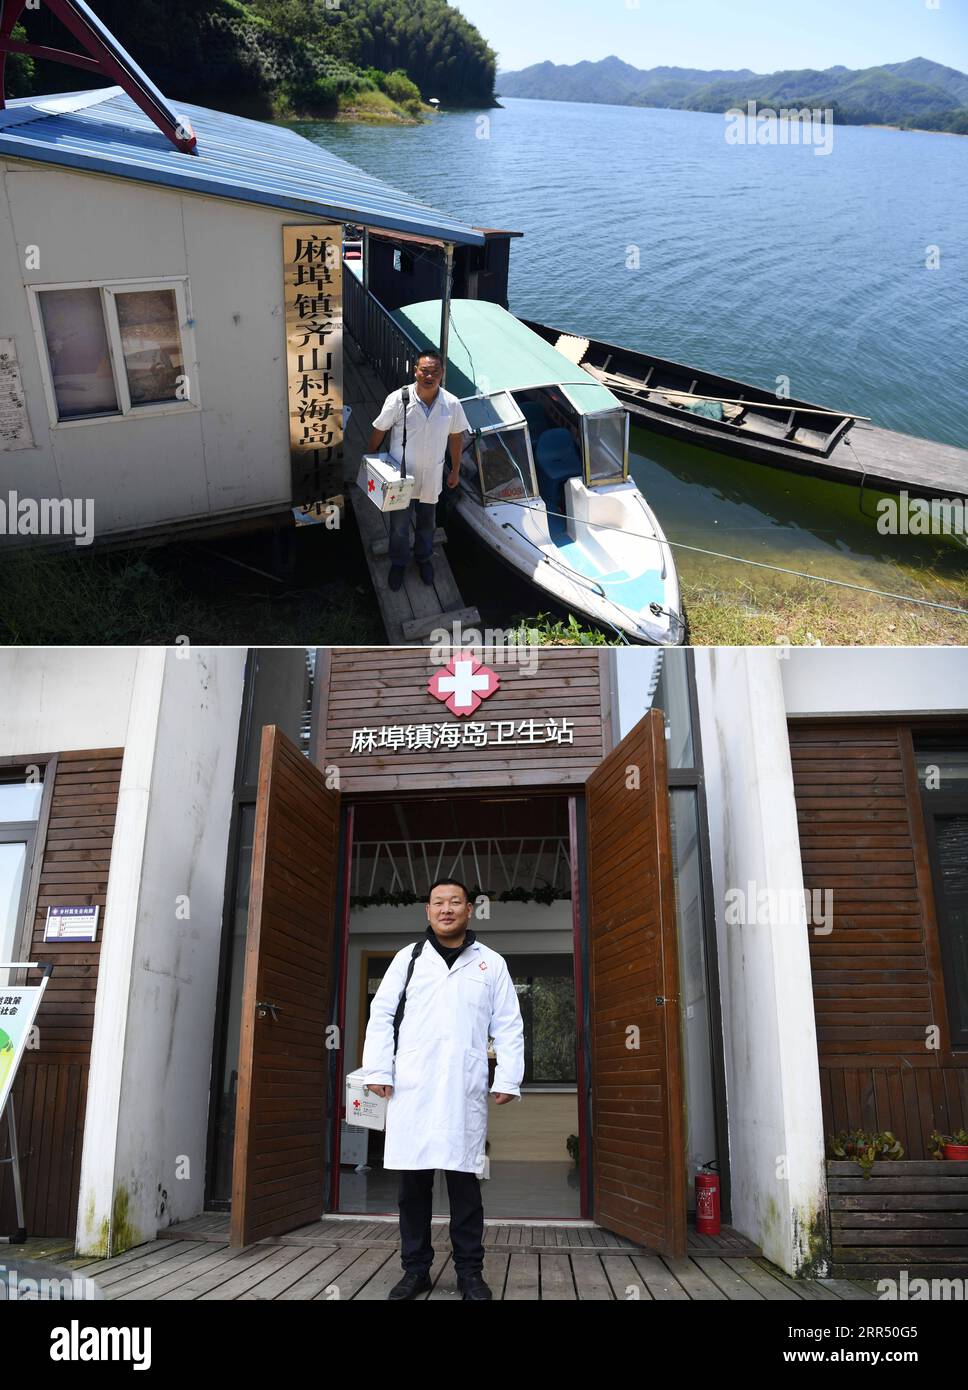 201218 -- JINZHAI, Dec. 18, 2020 -- Combo photo shows Yu Jiajun standing in front of his health station on Sept. 14, 2017 upper and Dec. 16, 2020 lower in Jinzhai County of Luan City, east China s Anhui Province. Deep in the Xianghongdian Reservoir area in Jinzhai County of Luan City, east China s Anhui Province, there is an isolated island, which used to be home to over 40 poor families. Yu Jiajun, 42, is the only doctor in the village. In the past, there was no health station on the island. Villagers had to row a boat for two or three hours to go to the health center in Mabu Township to see Stock Photo